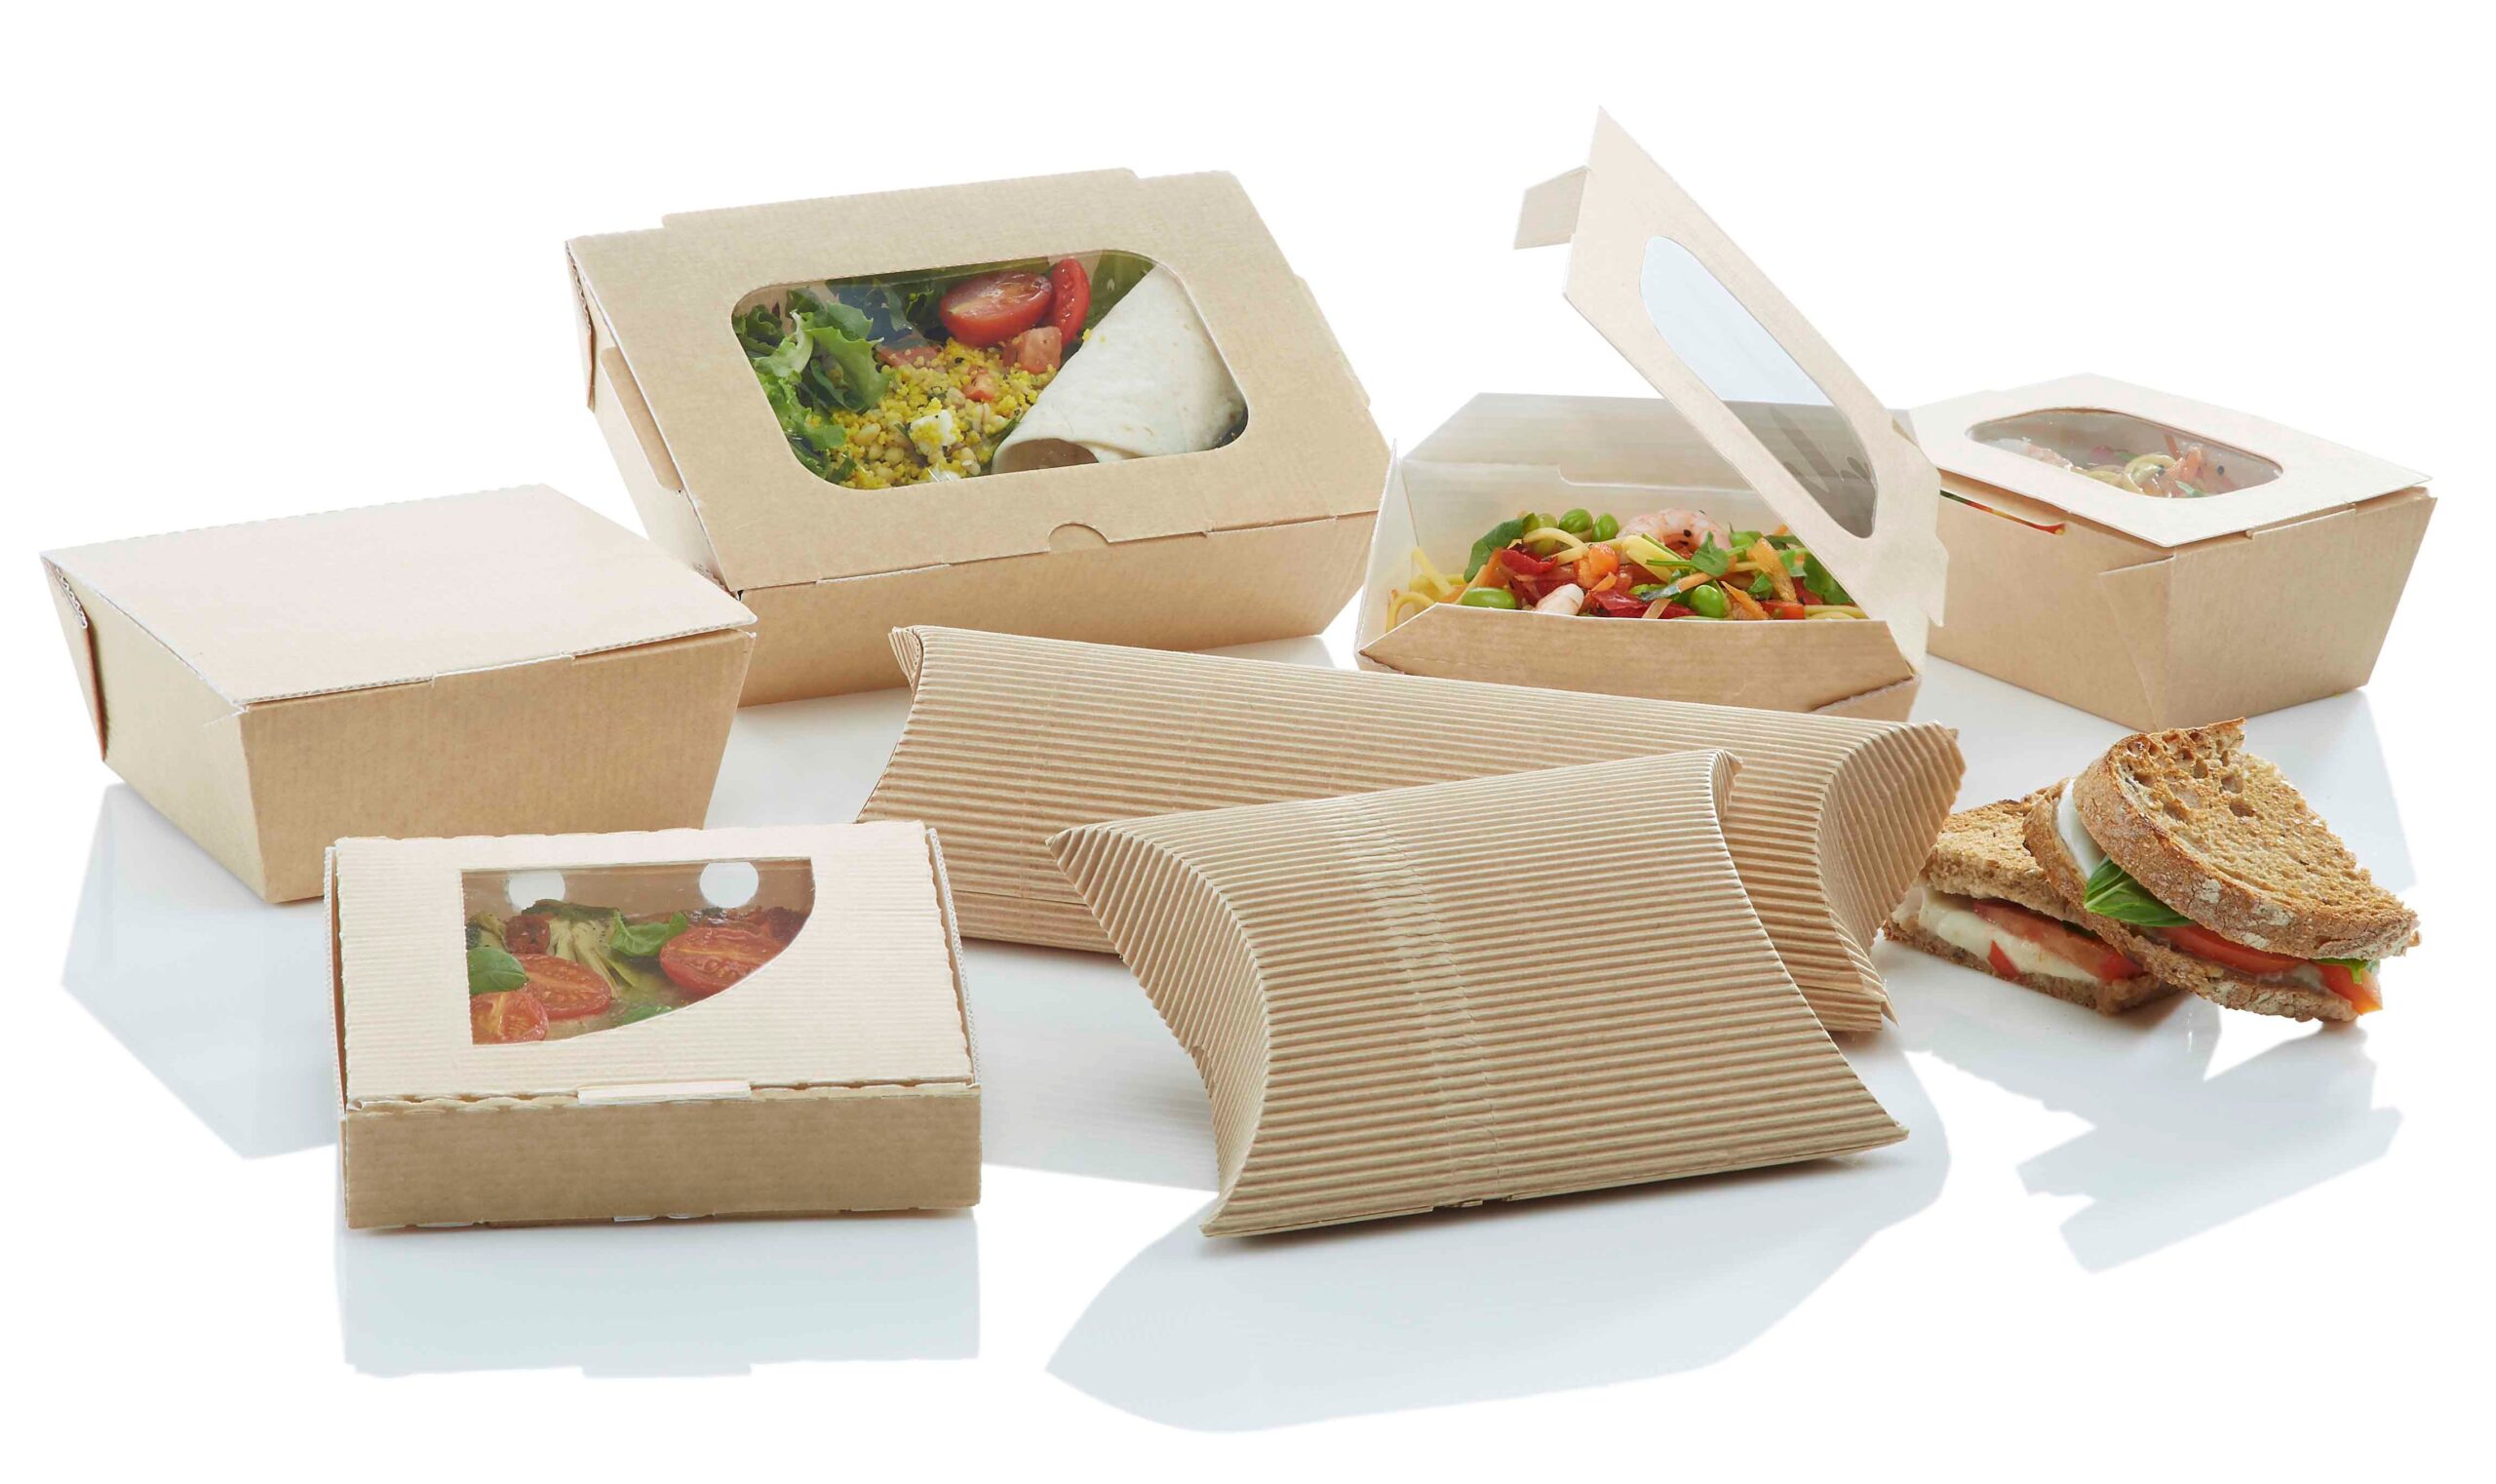 Boxed Packaged Foods